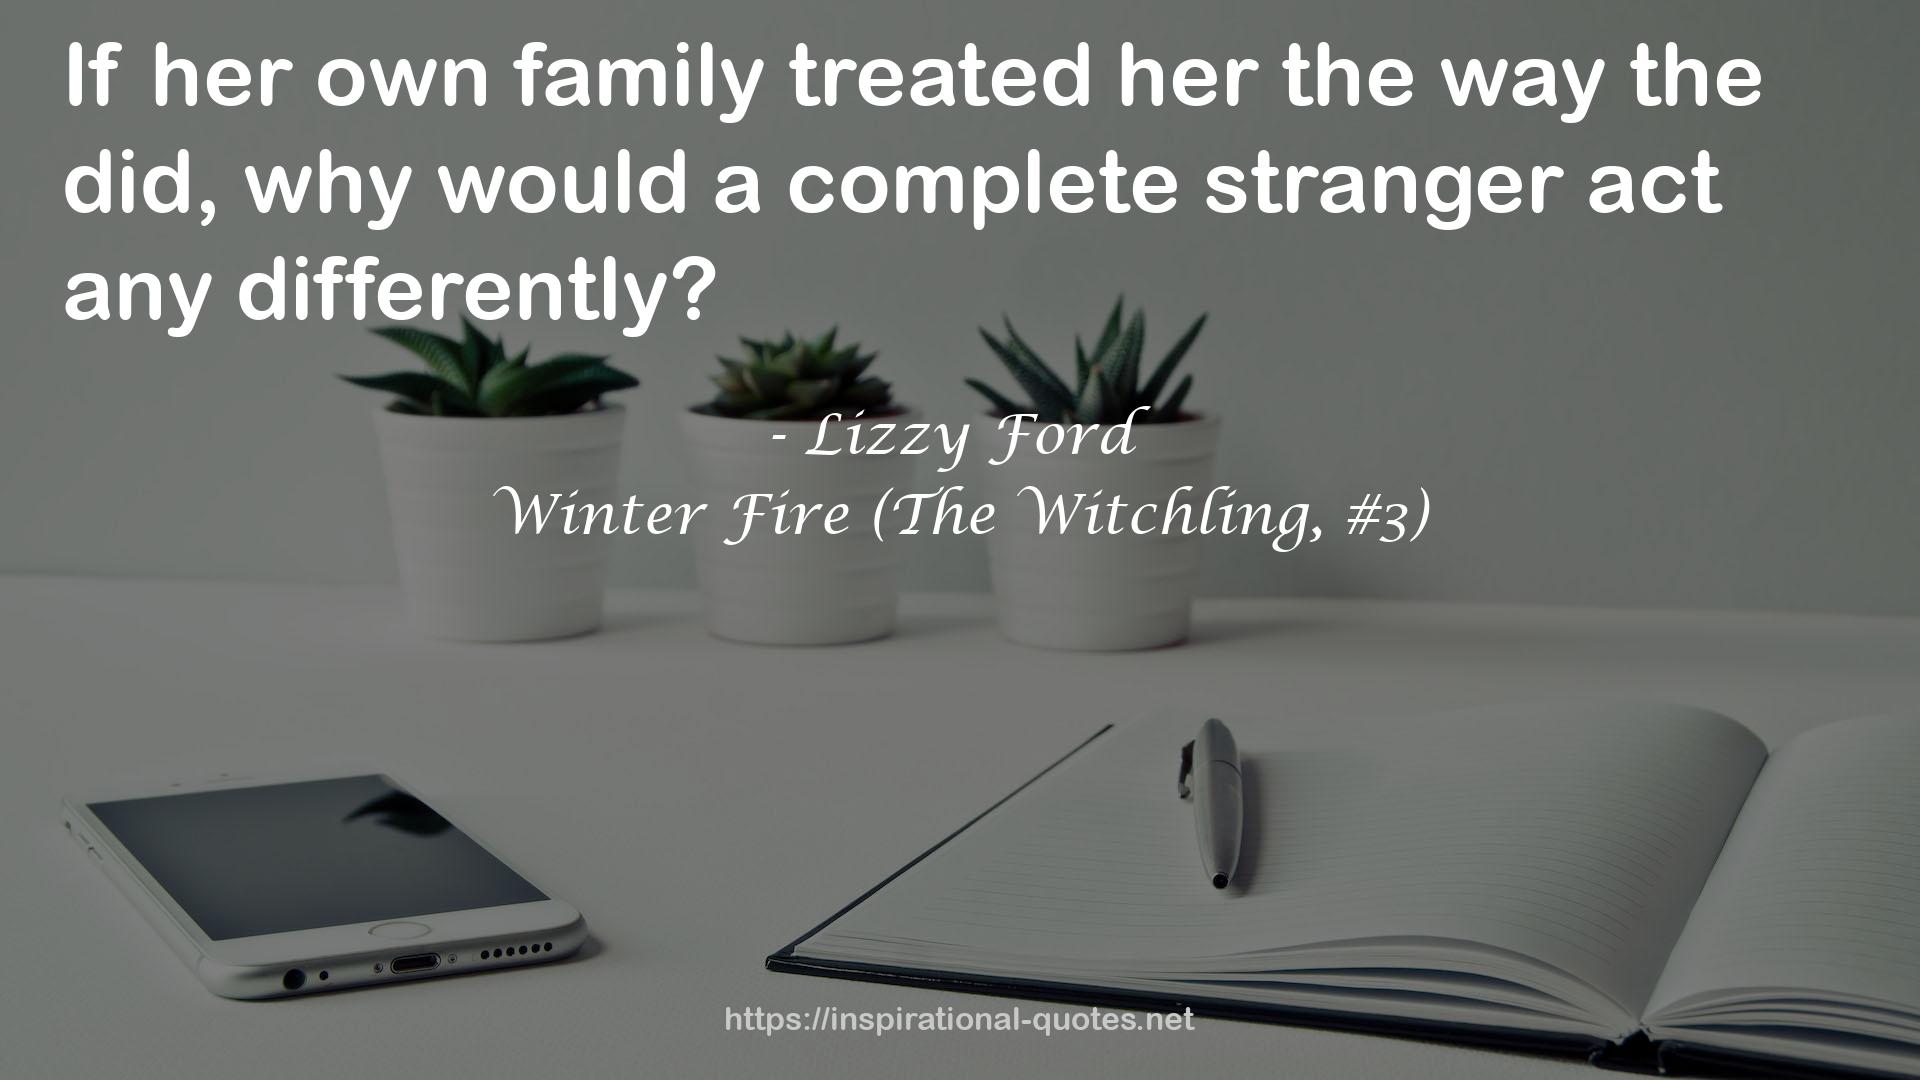 Winter Fire (The Witchling, #3) QUOTES